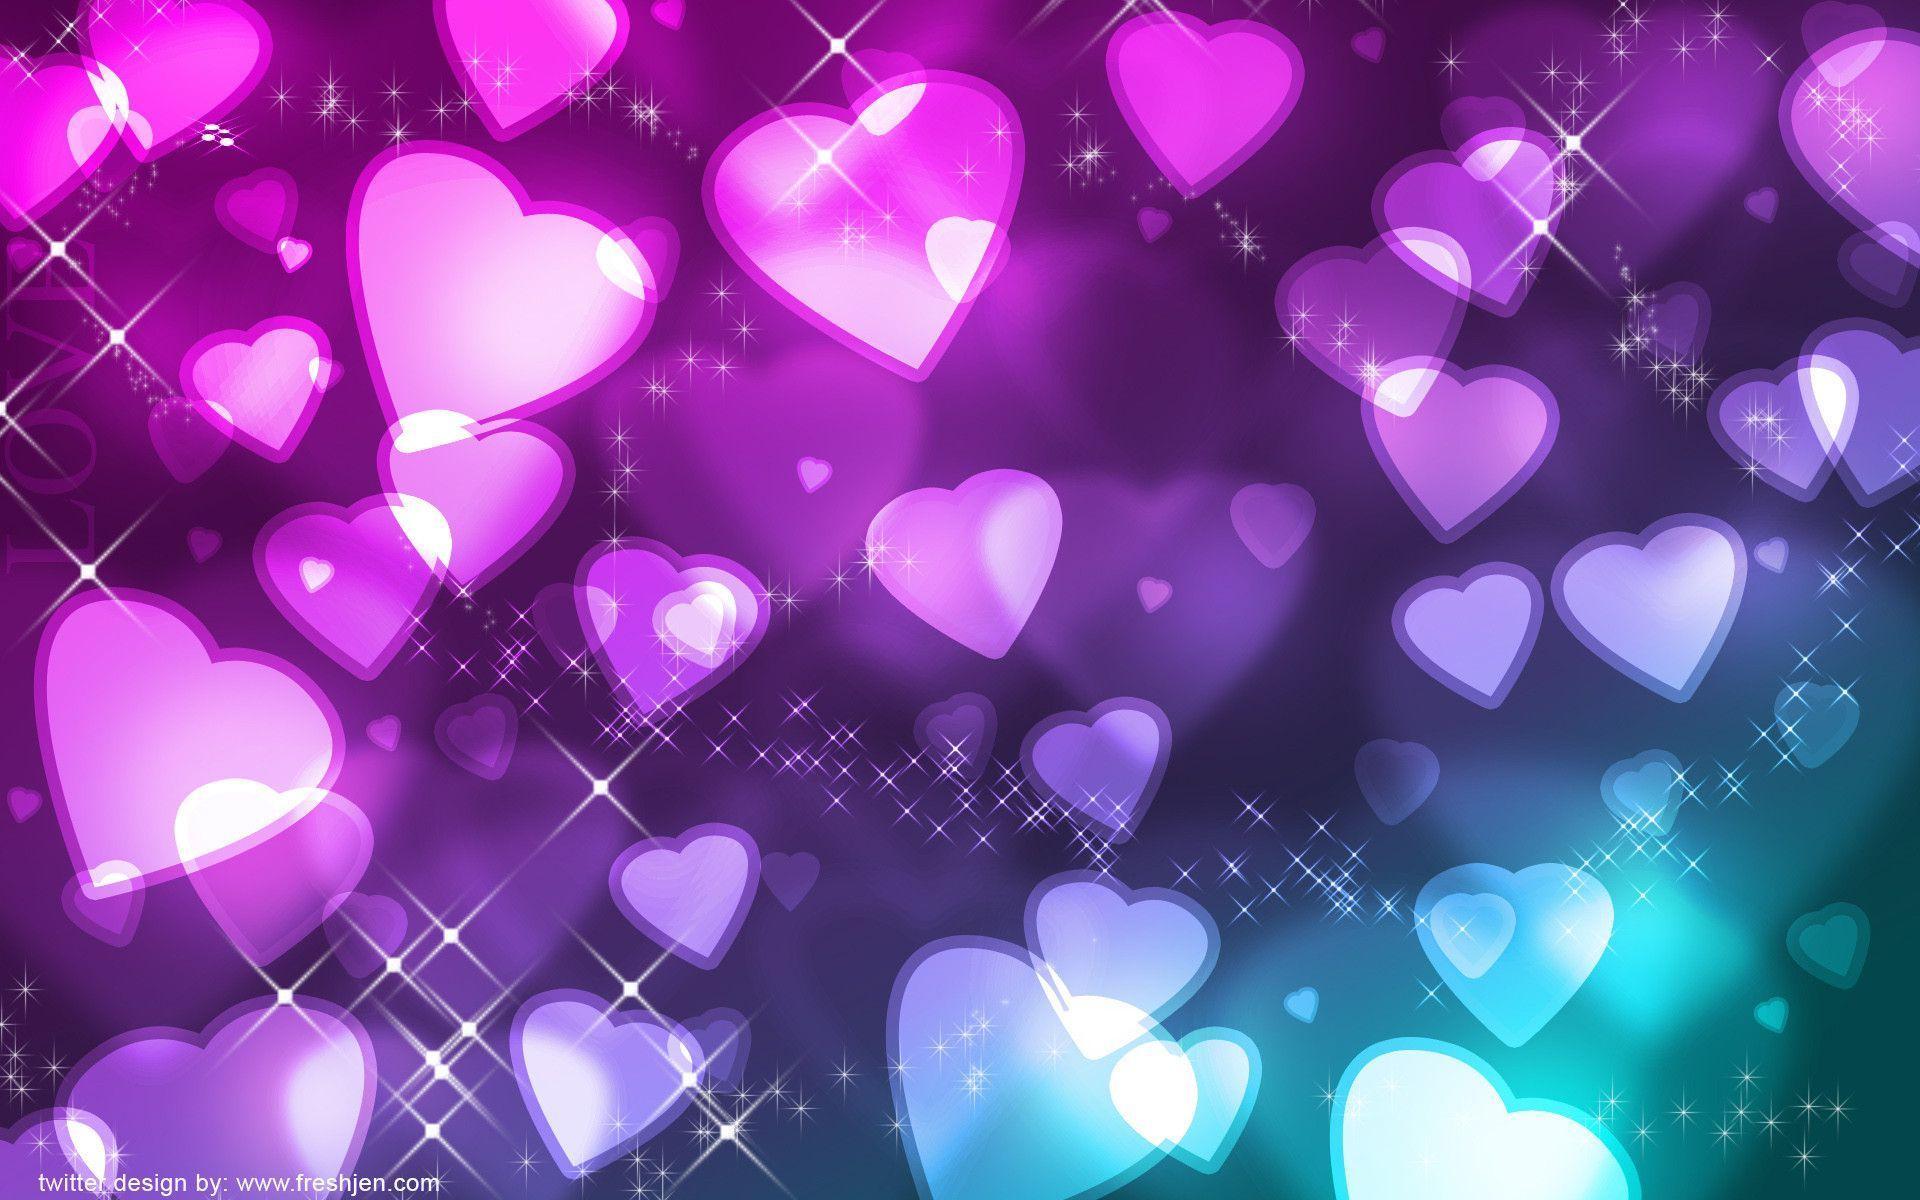 Wallpaper For > Colorful Stars And Hearts Background